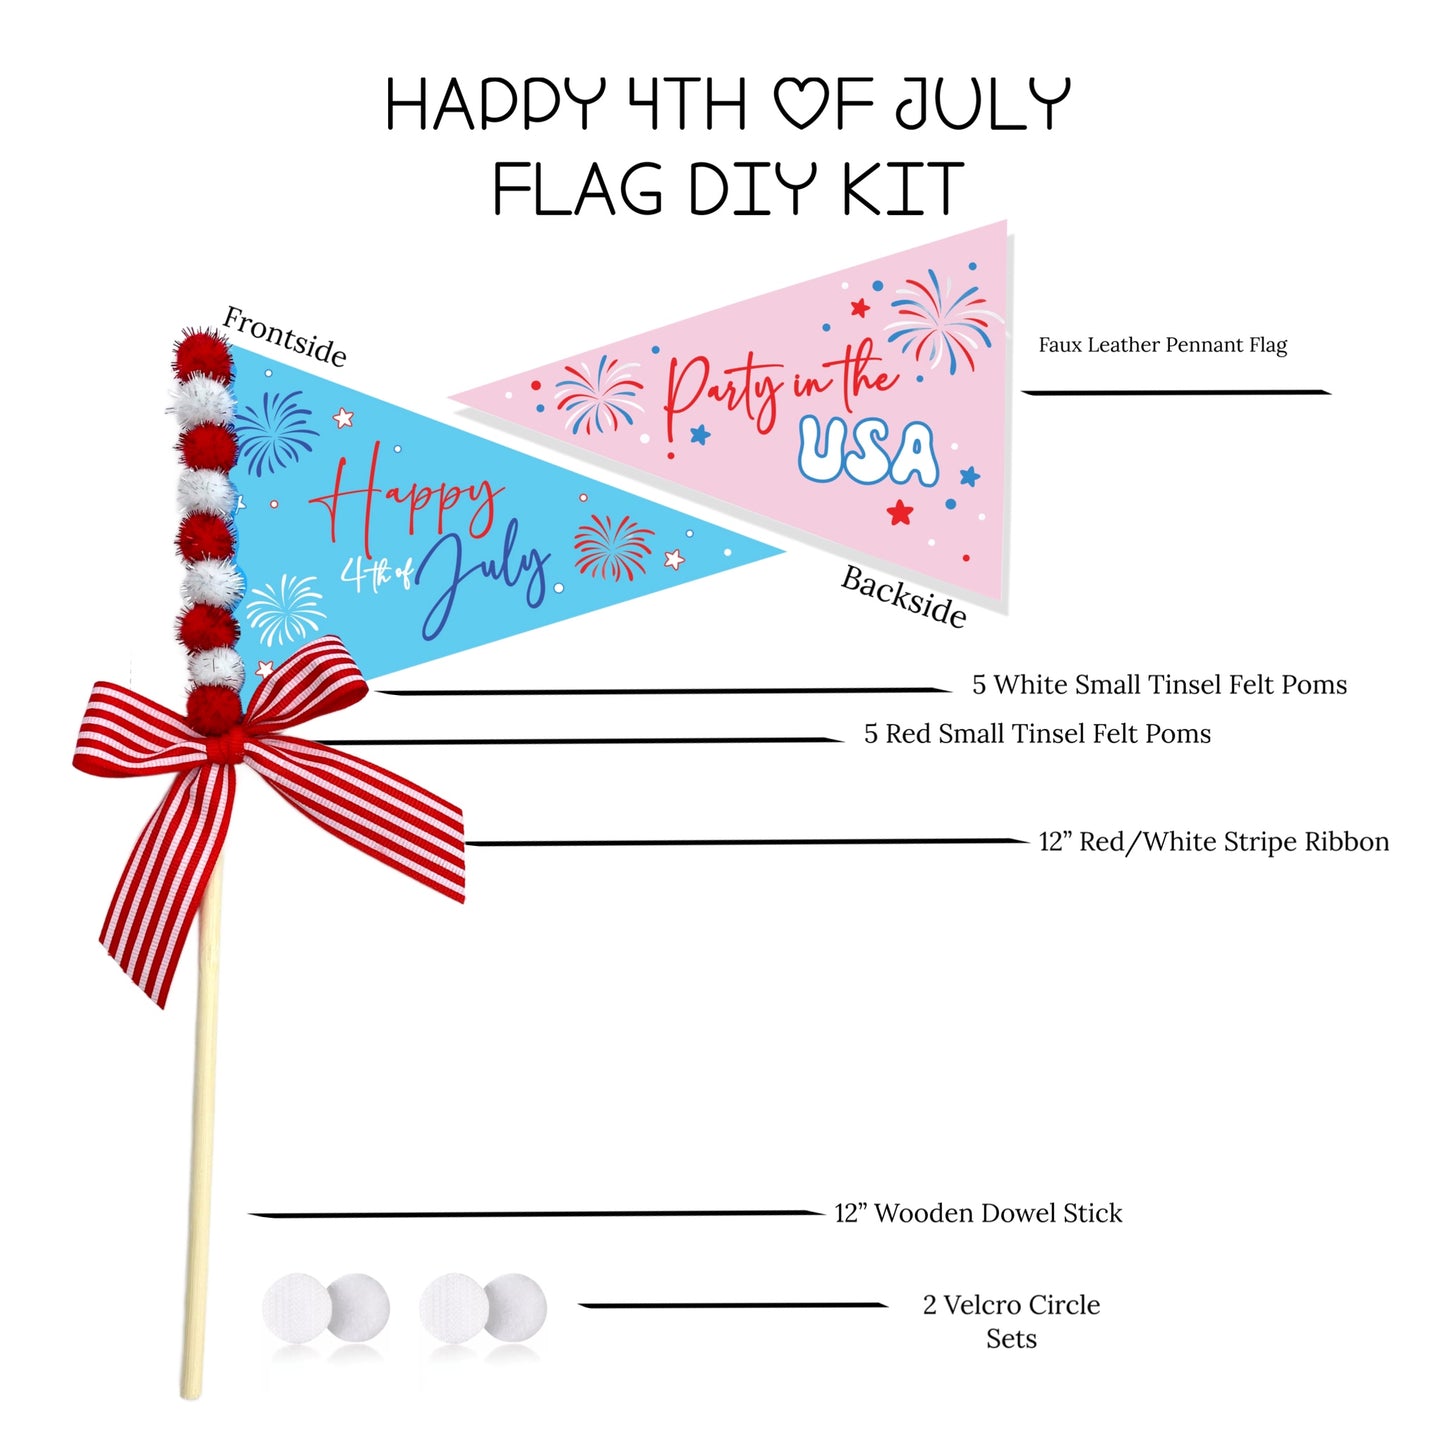 Happy 4th of July Faux Leather Pennant Flags - DIY - PIPS EXCLUSIVE